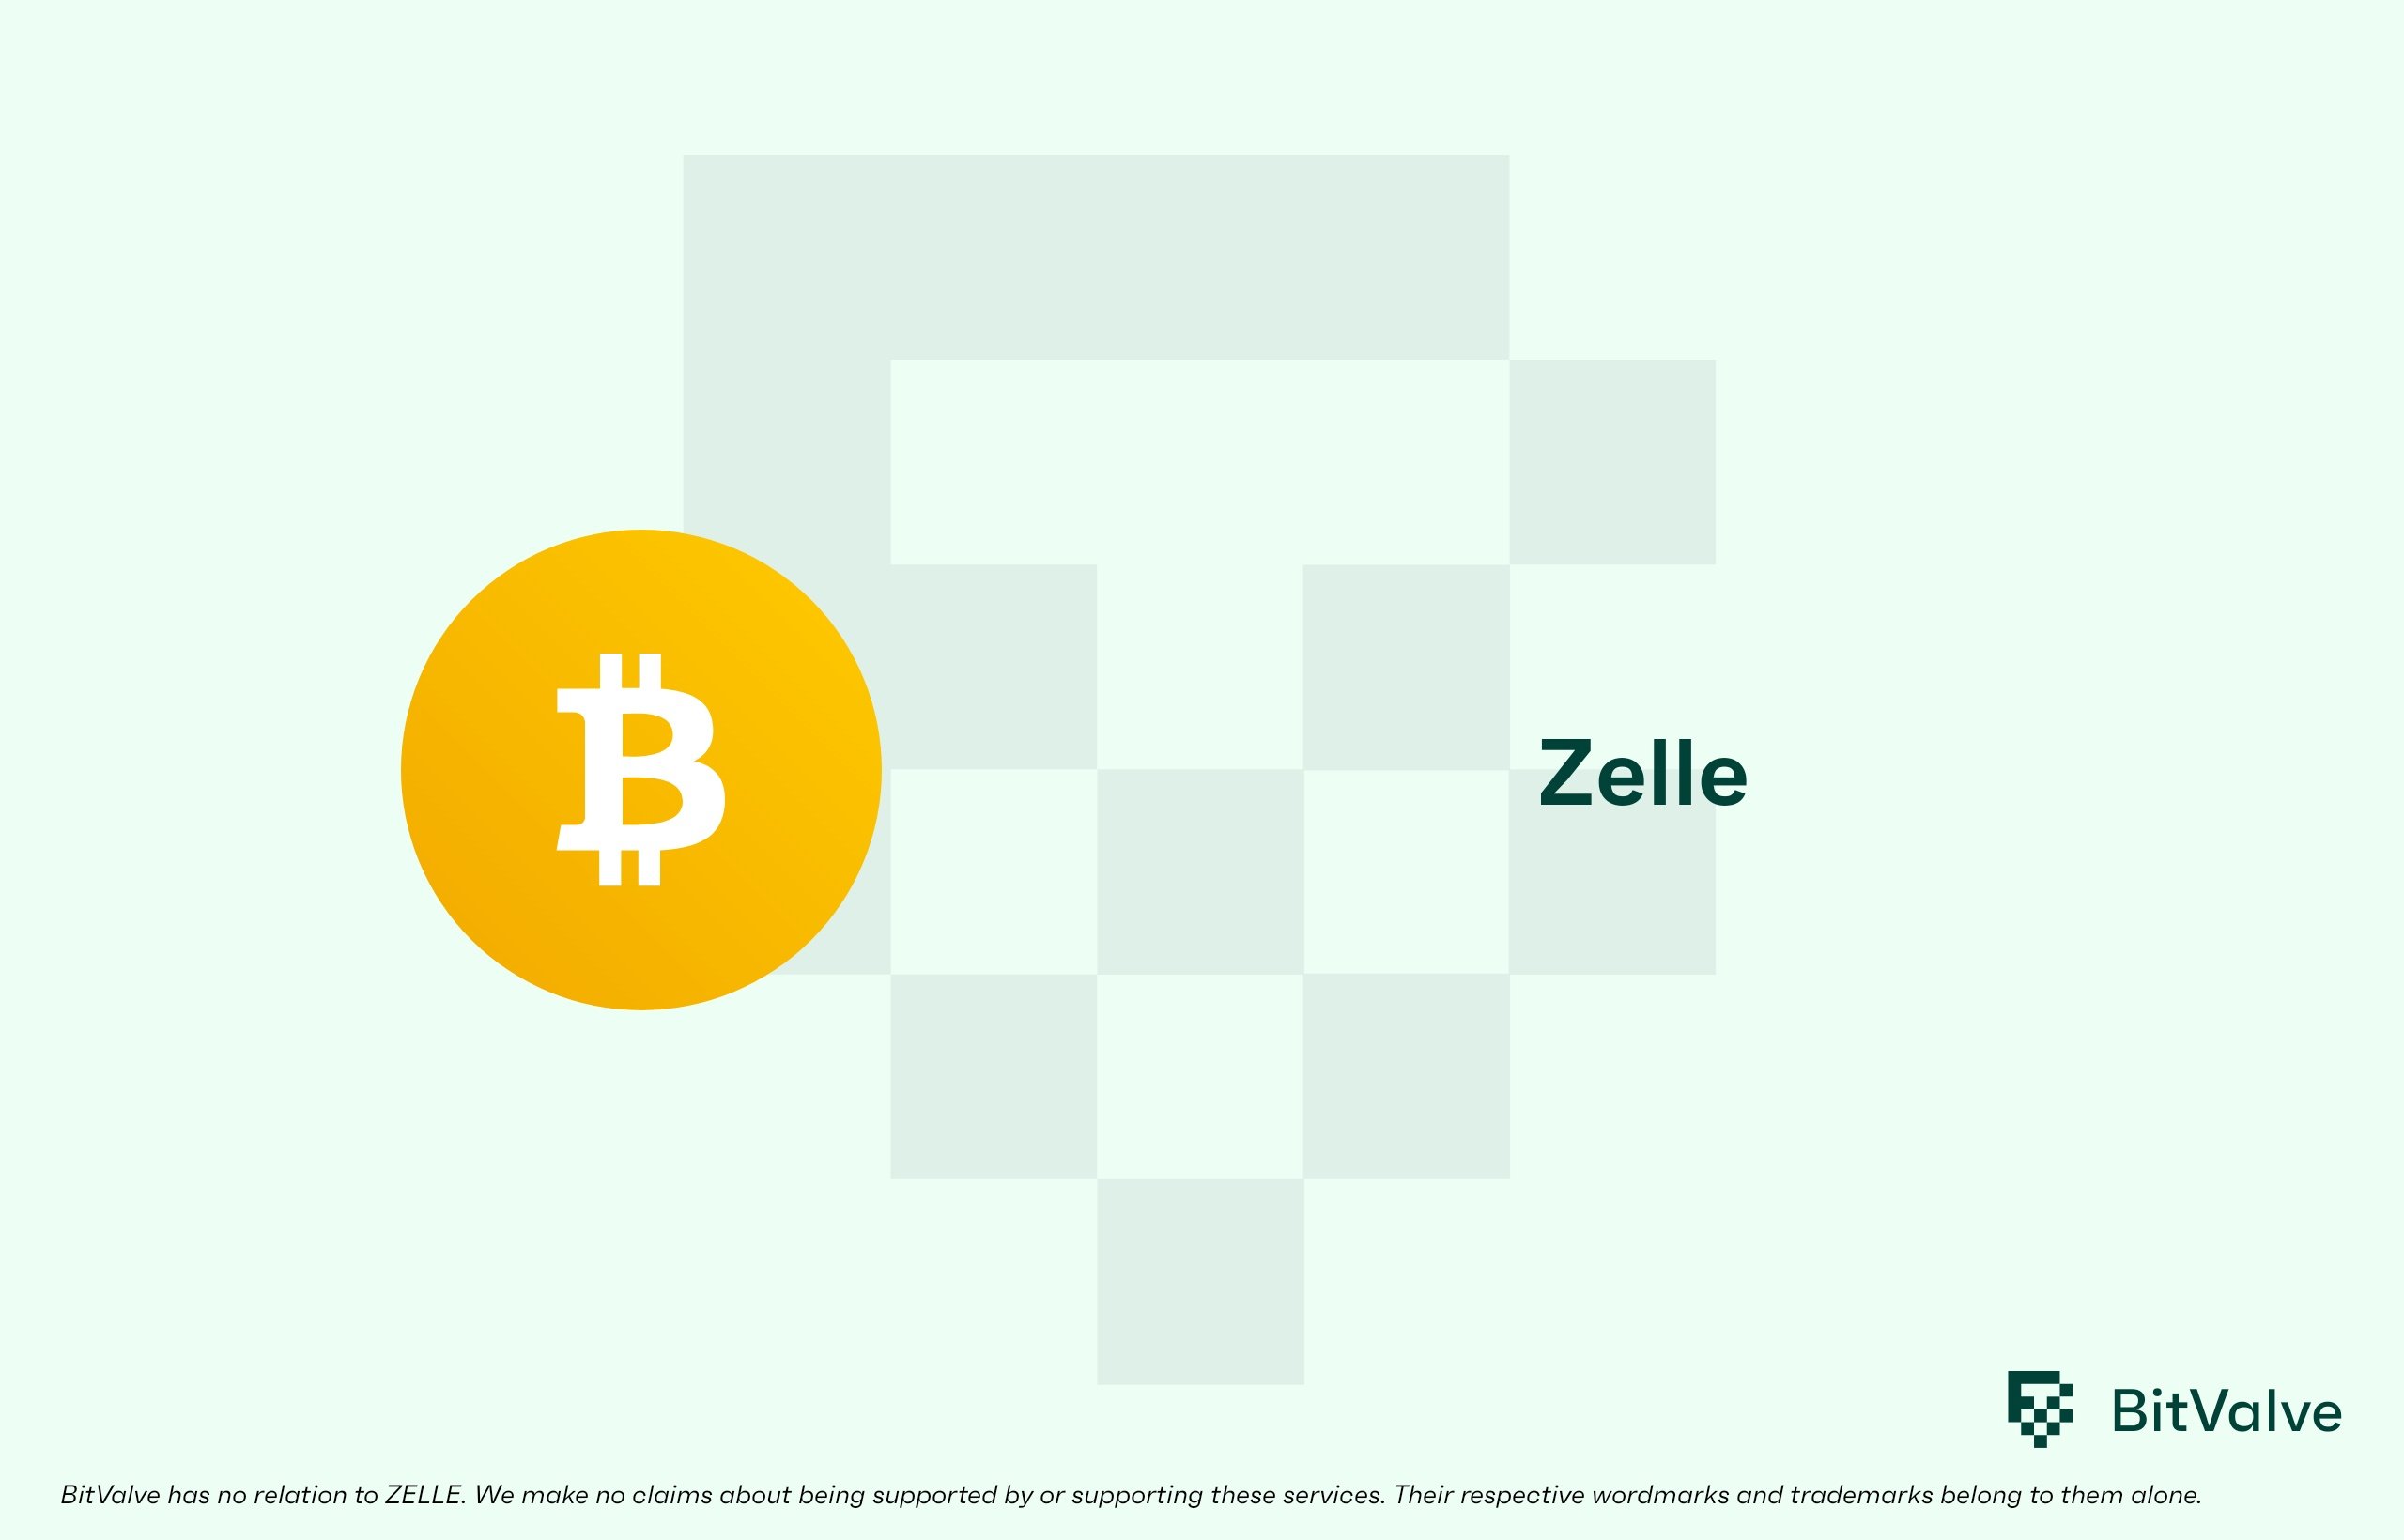 How to Buy Bitcoin with Zelle: Step-By-Step Guide - bitcoinhelp.fun